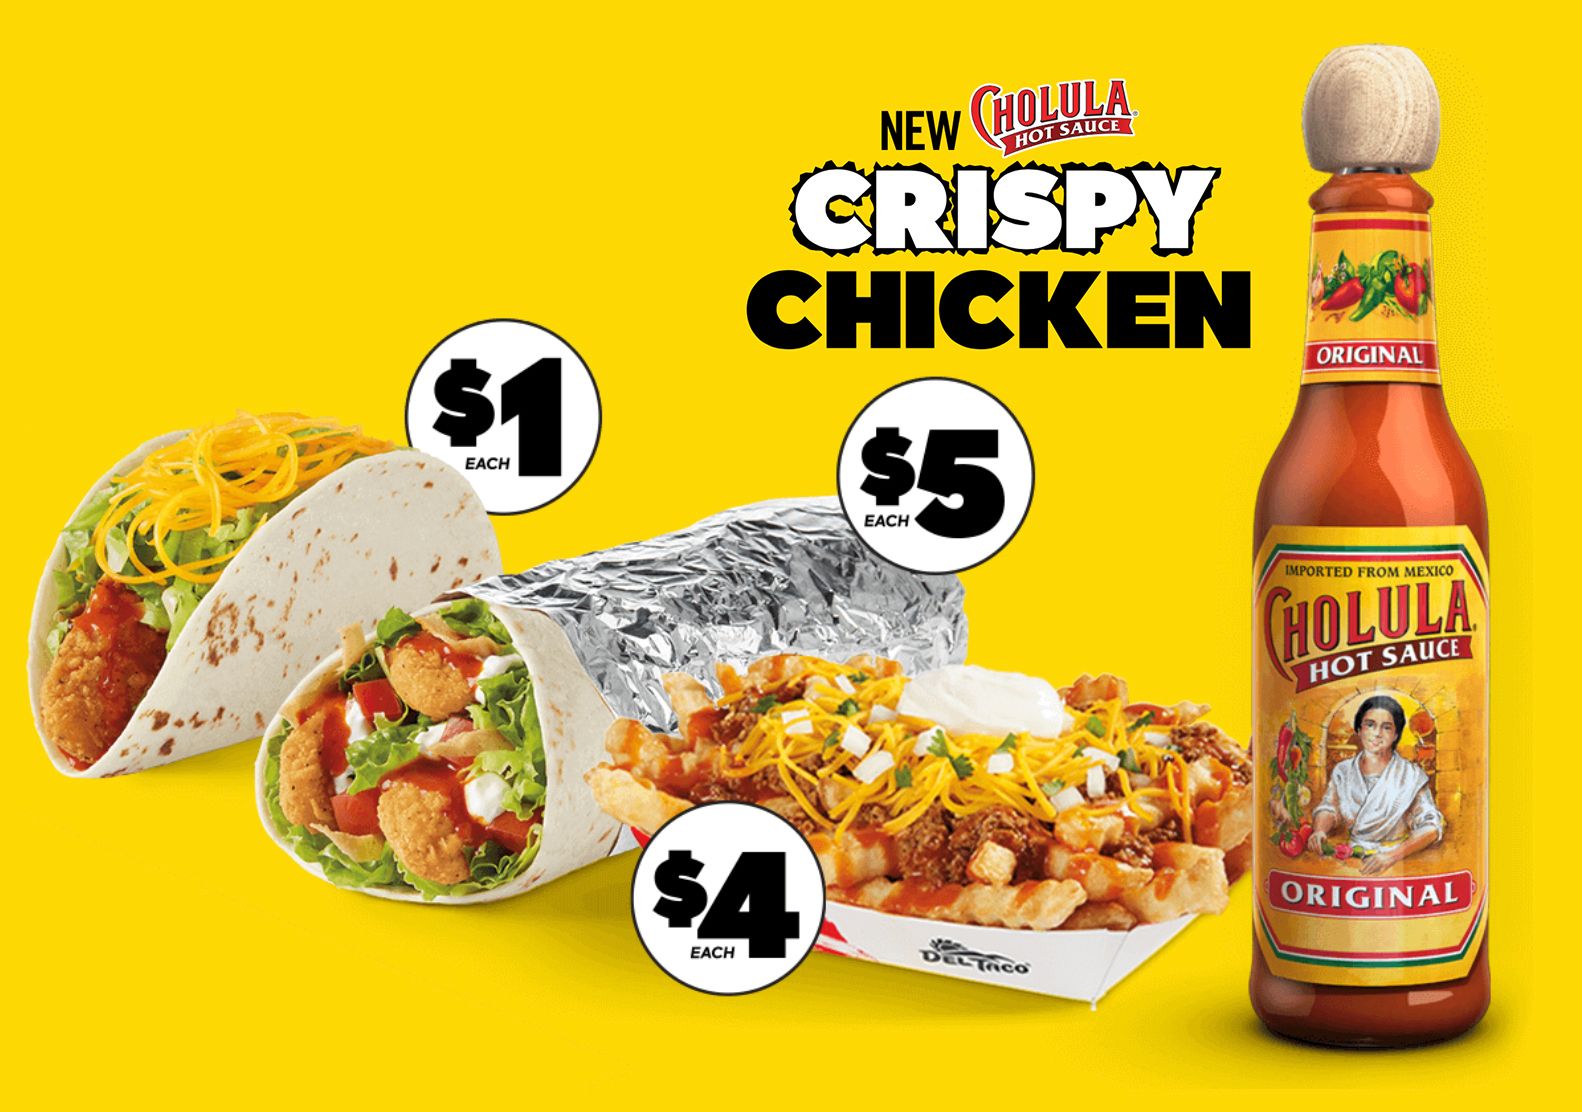 Del Taco Launches a New Line of Cholula-Inspired Crispy Chicken Burritos, Tacos and More